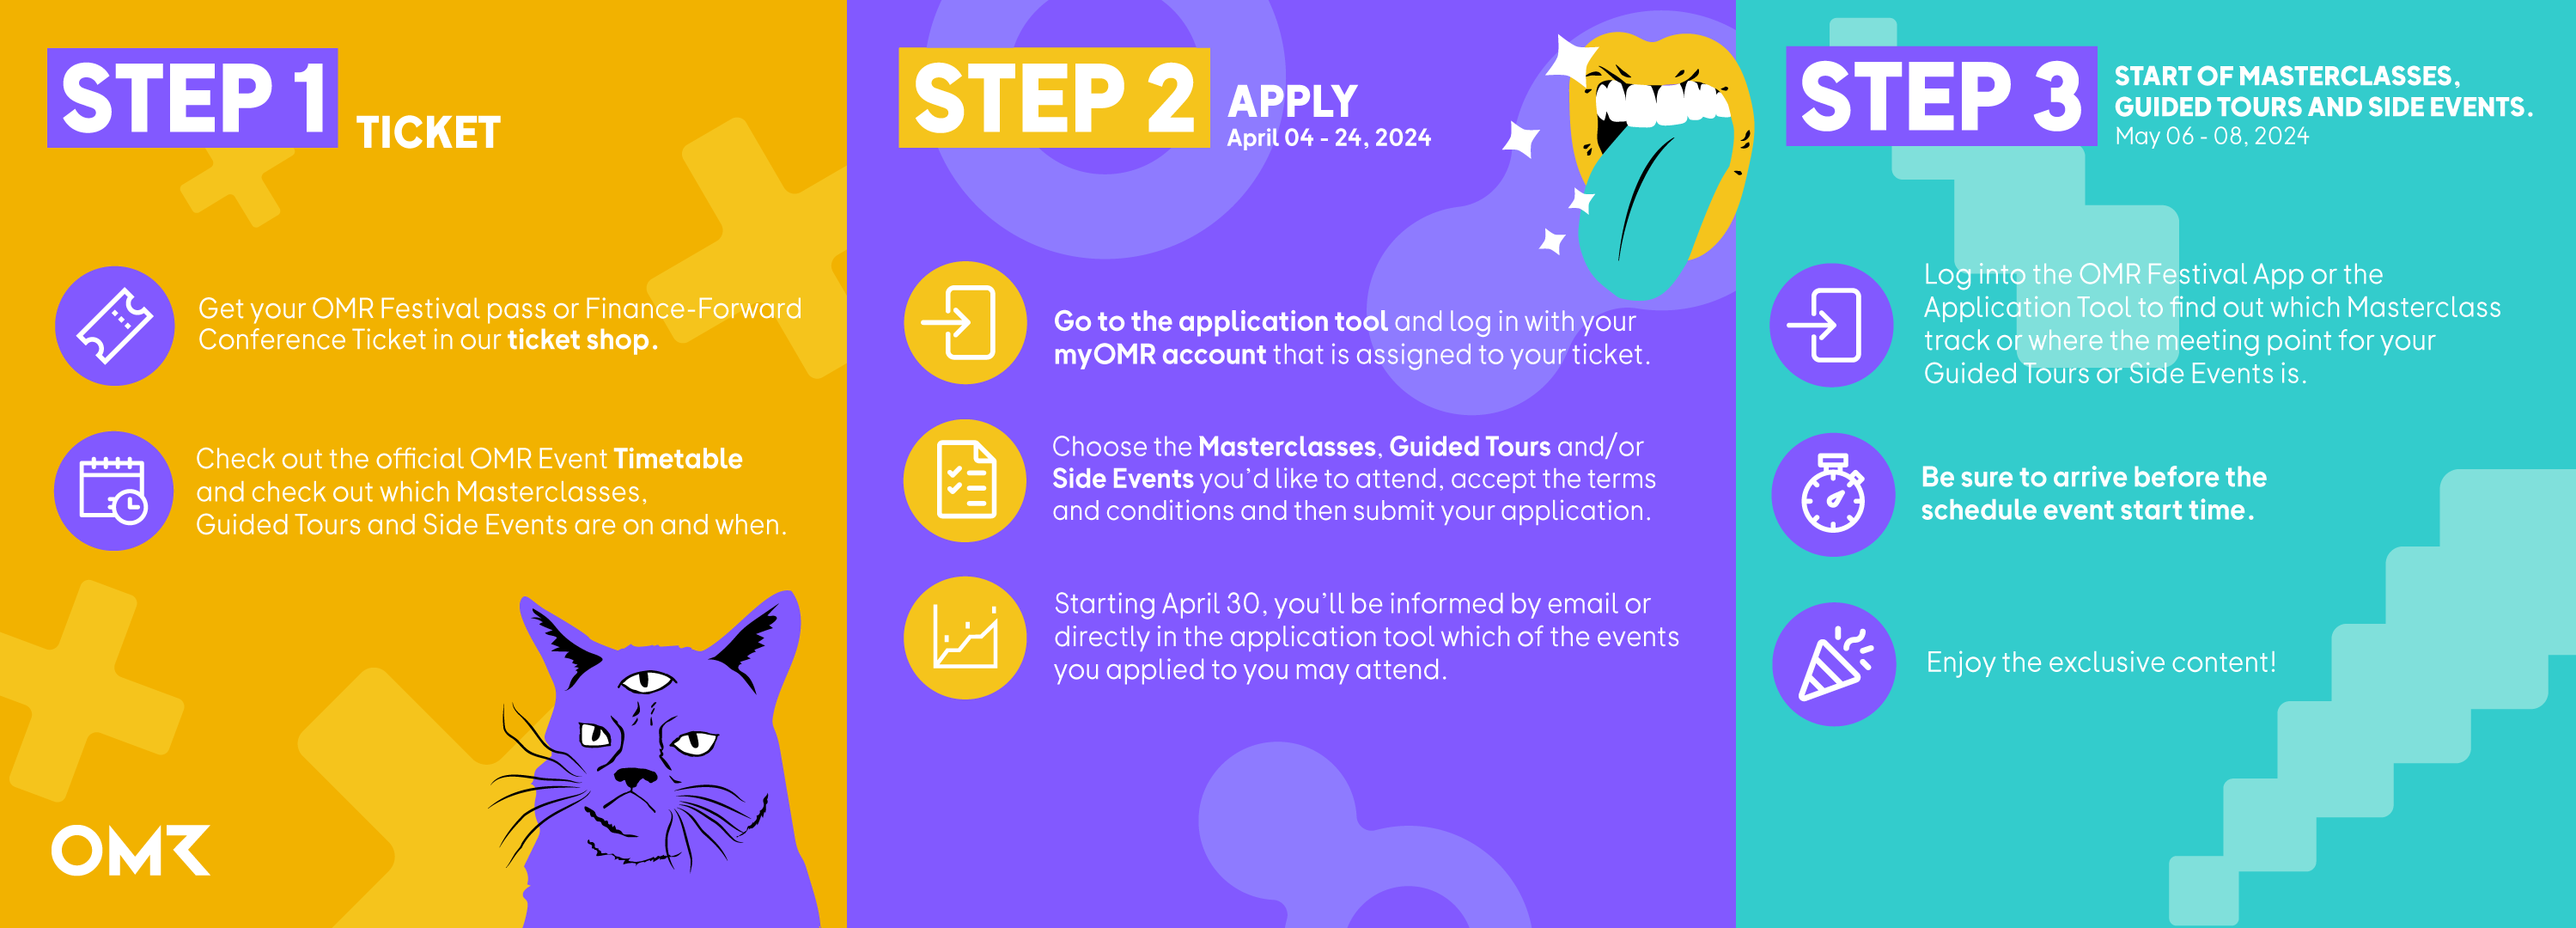 Infographic_OMR24 Application Phase_Masterclasses, Guided Tours, Side Events